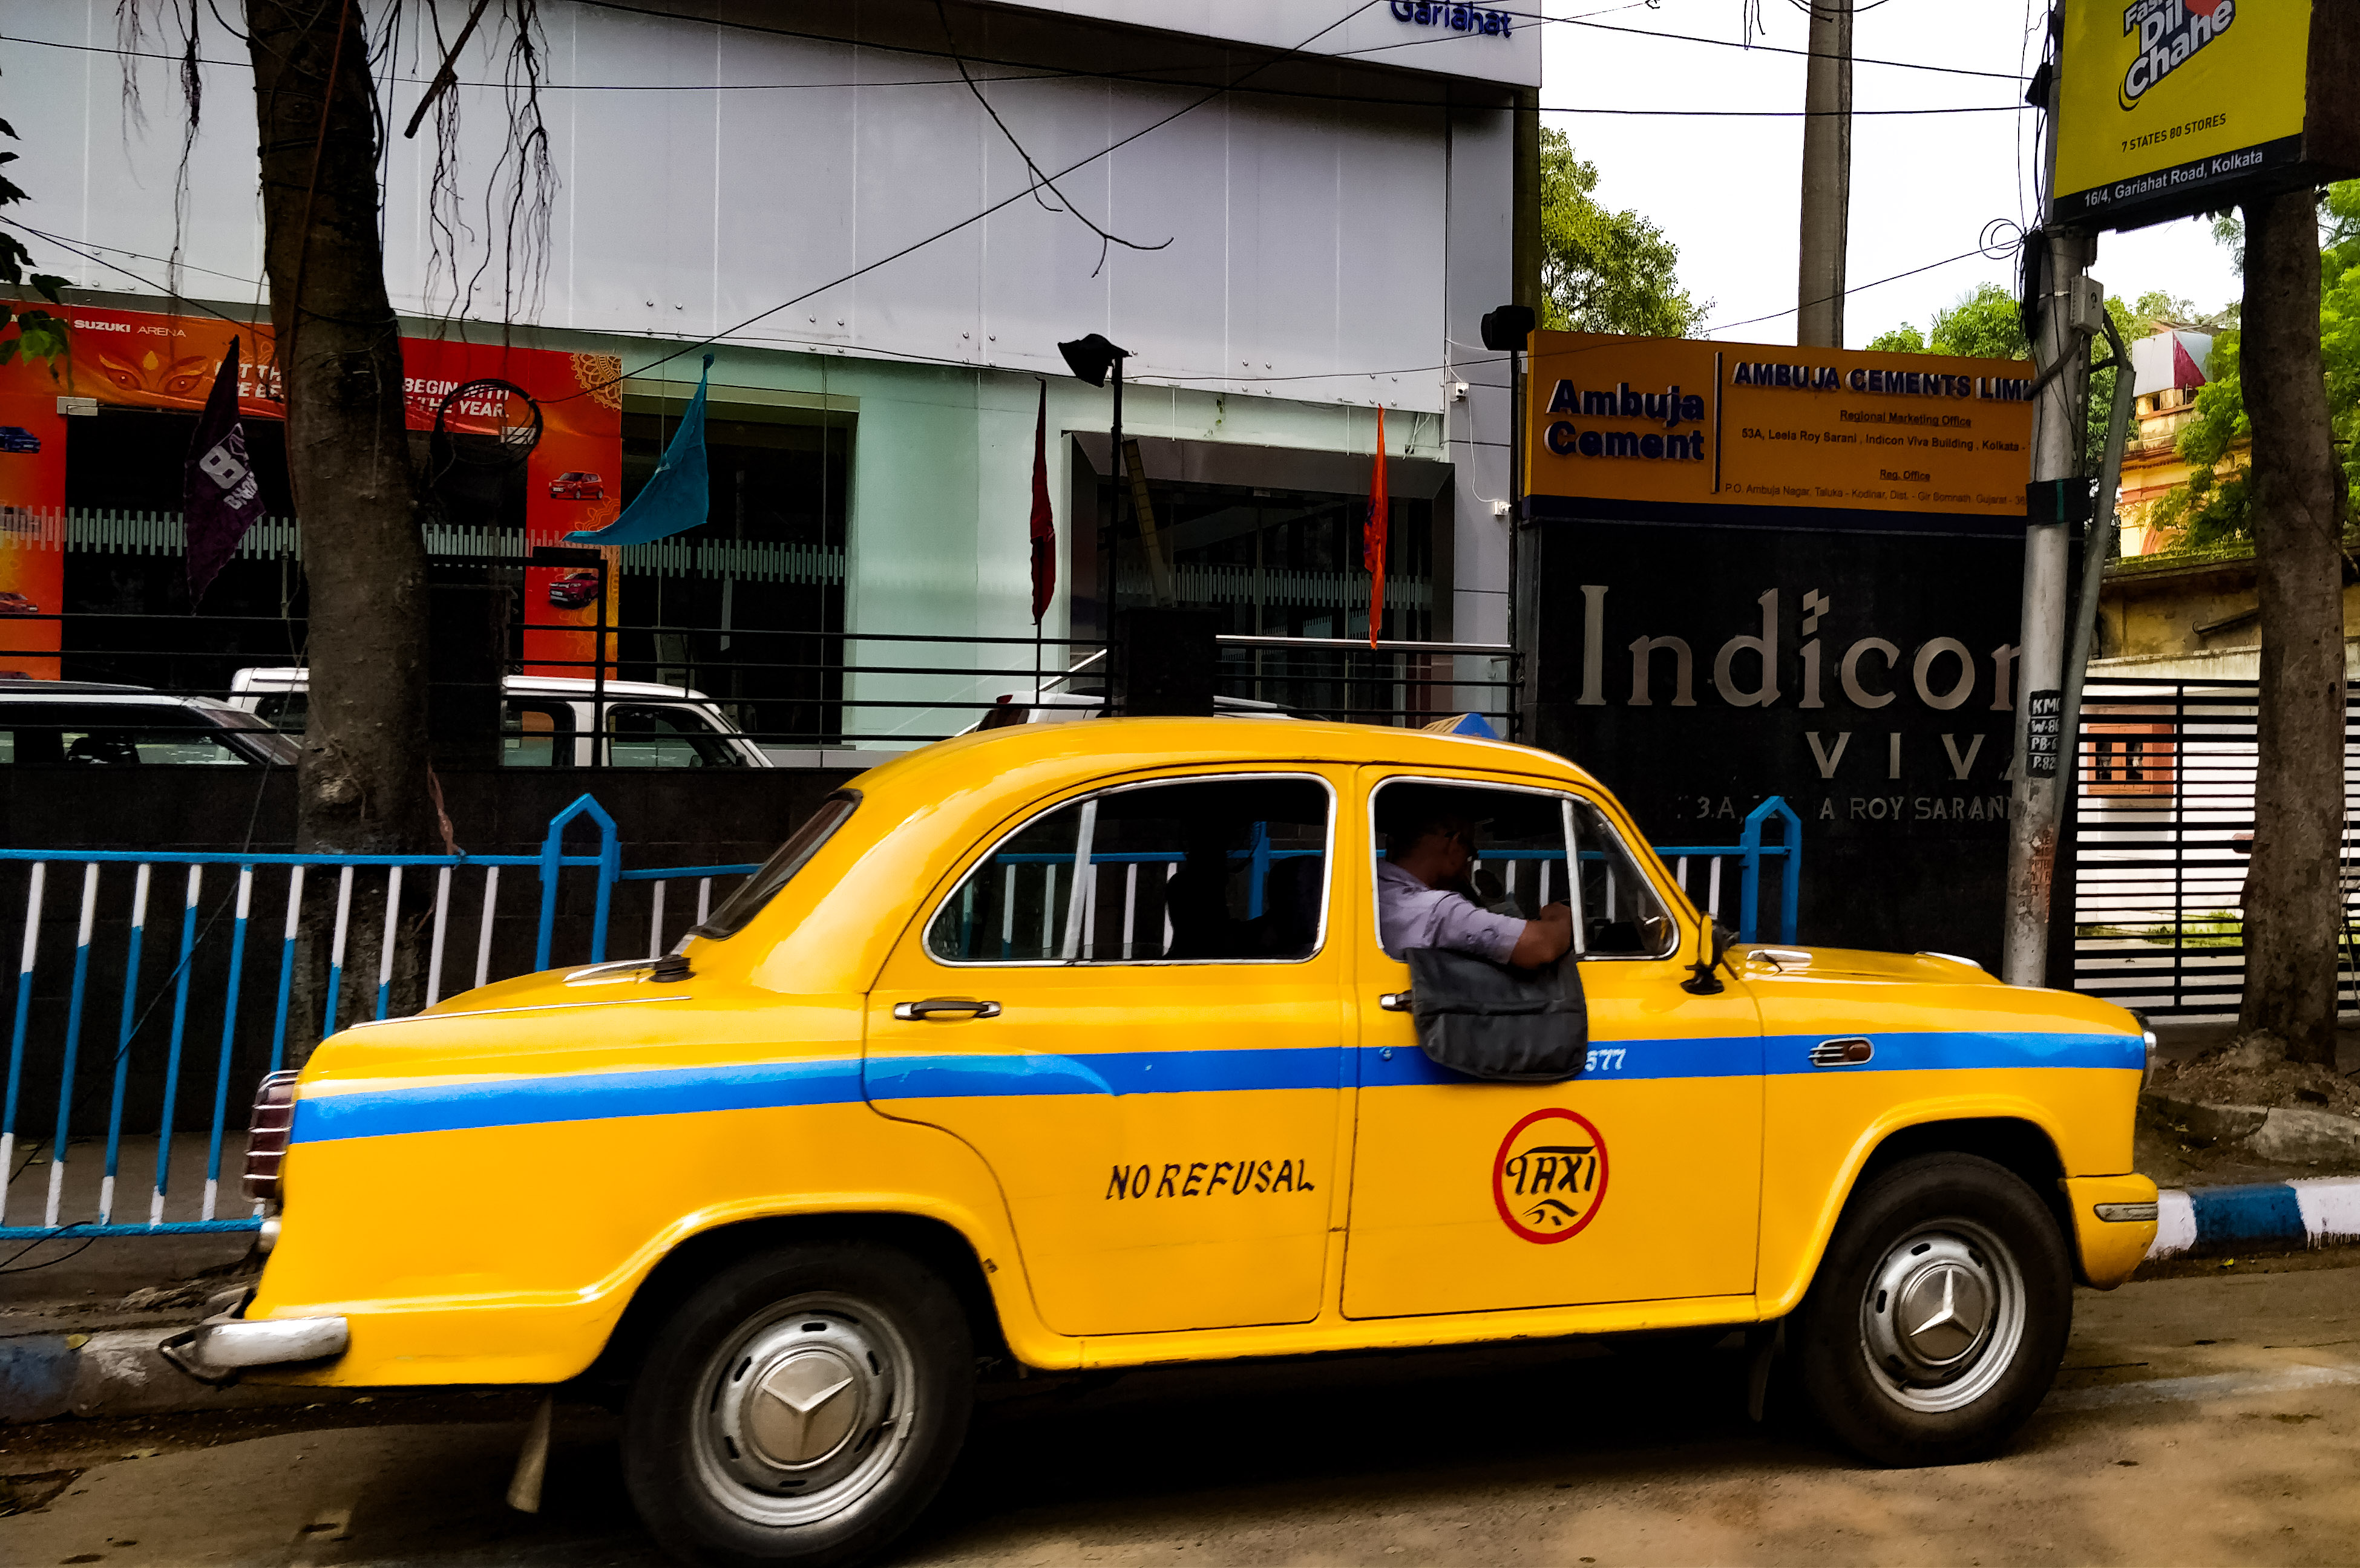 Kolkata's signature yellow Ambassador taxis are a great way to get around the city